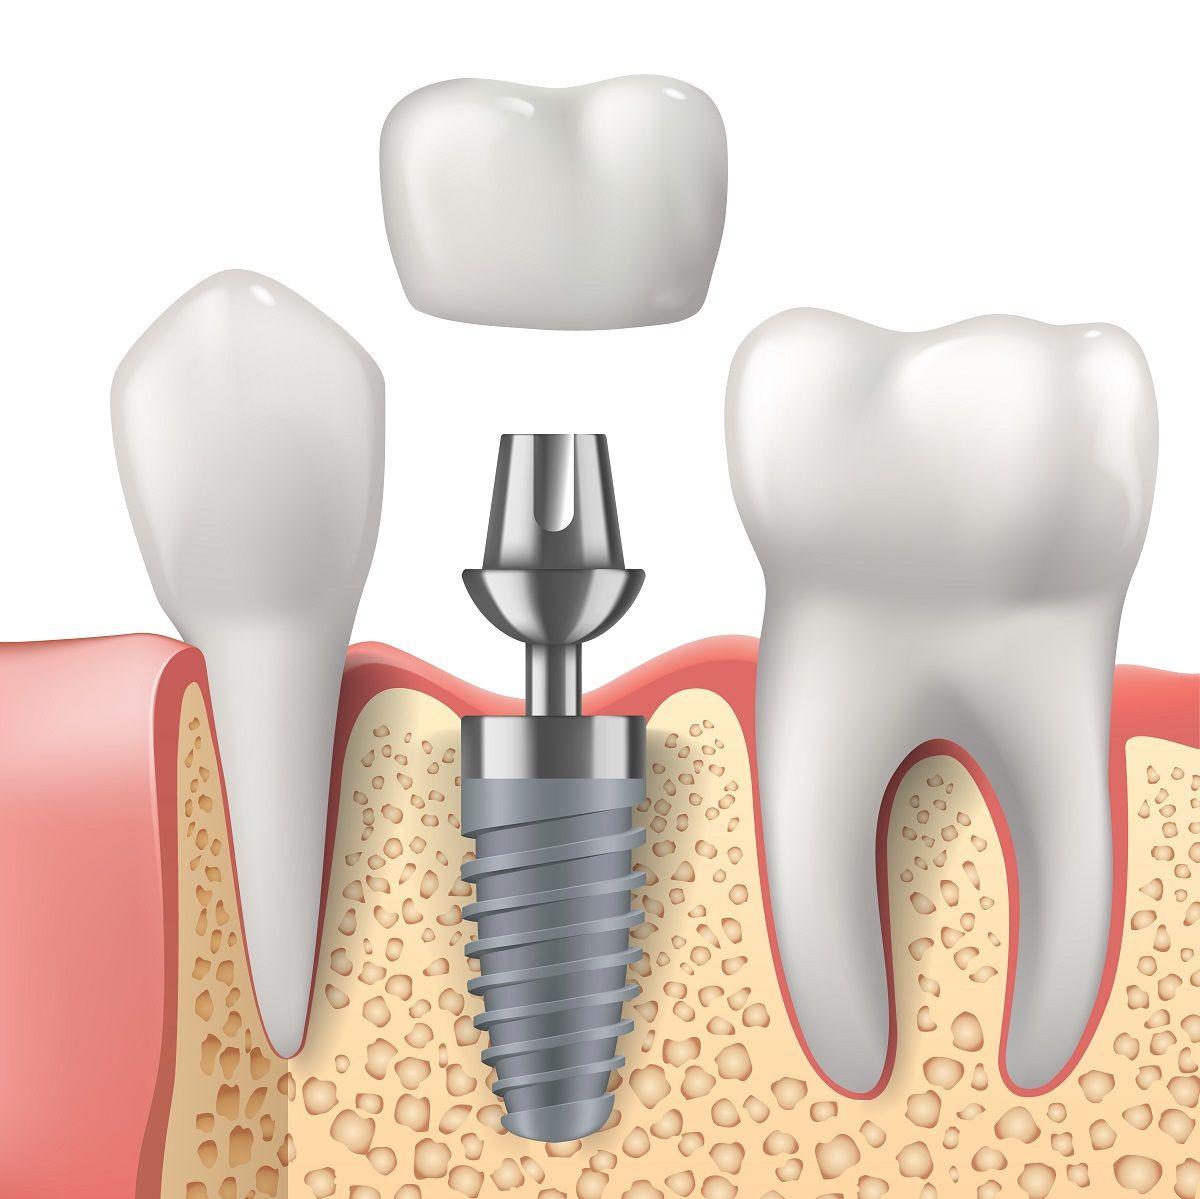 The Dental Implant Procedure: What to Expect?